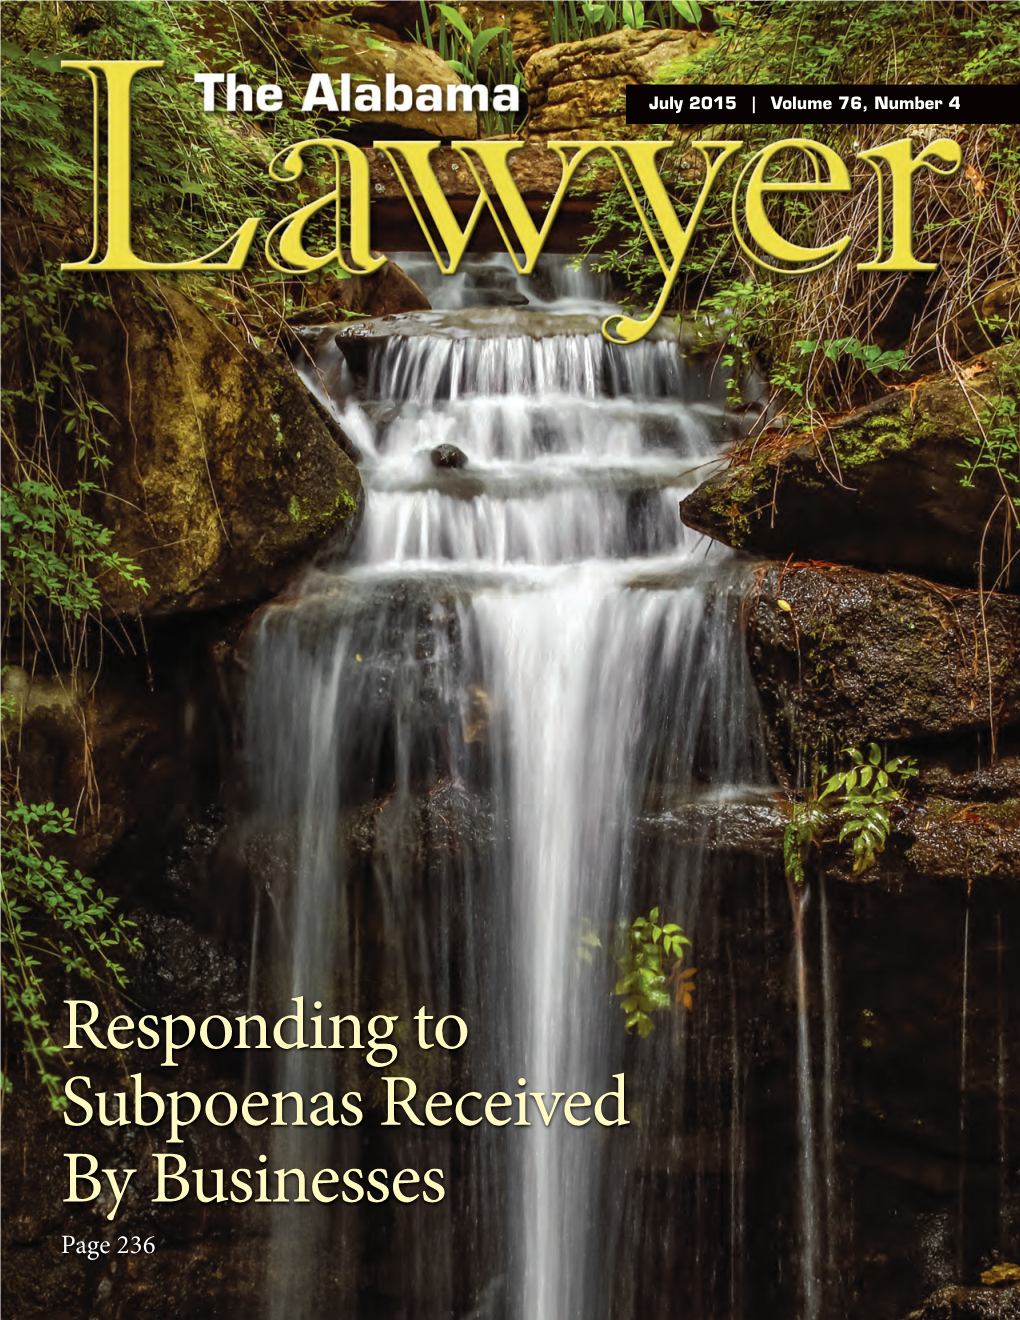 Responding to Subpoenas Received by Businesses Page 236 Lawyerjuly15 Lawyer 6/19/15 9:53 AM Page 210